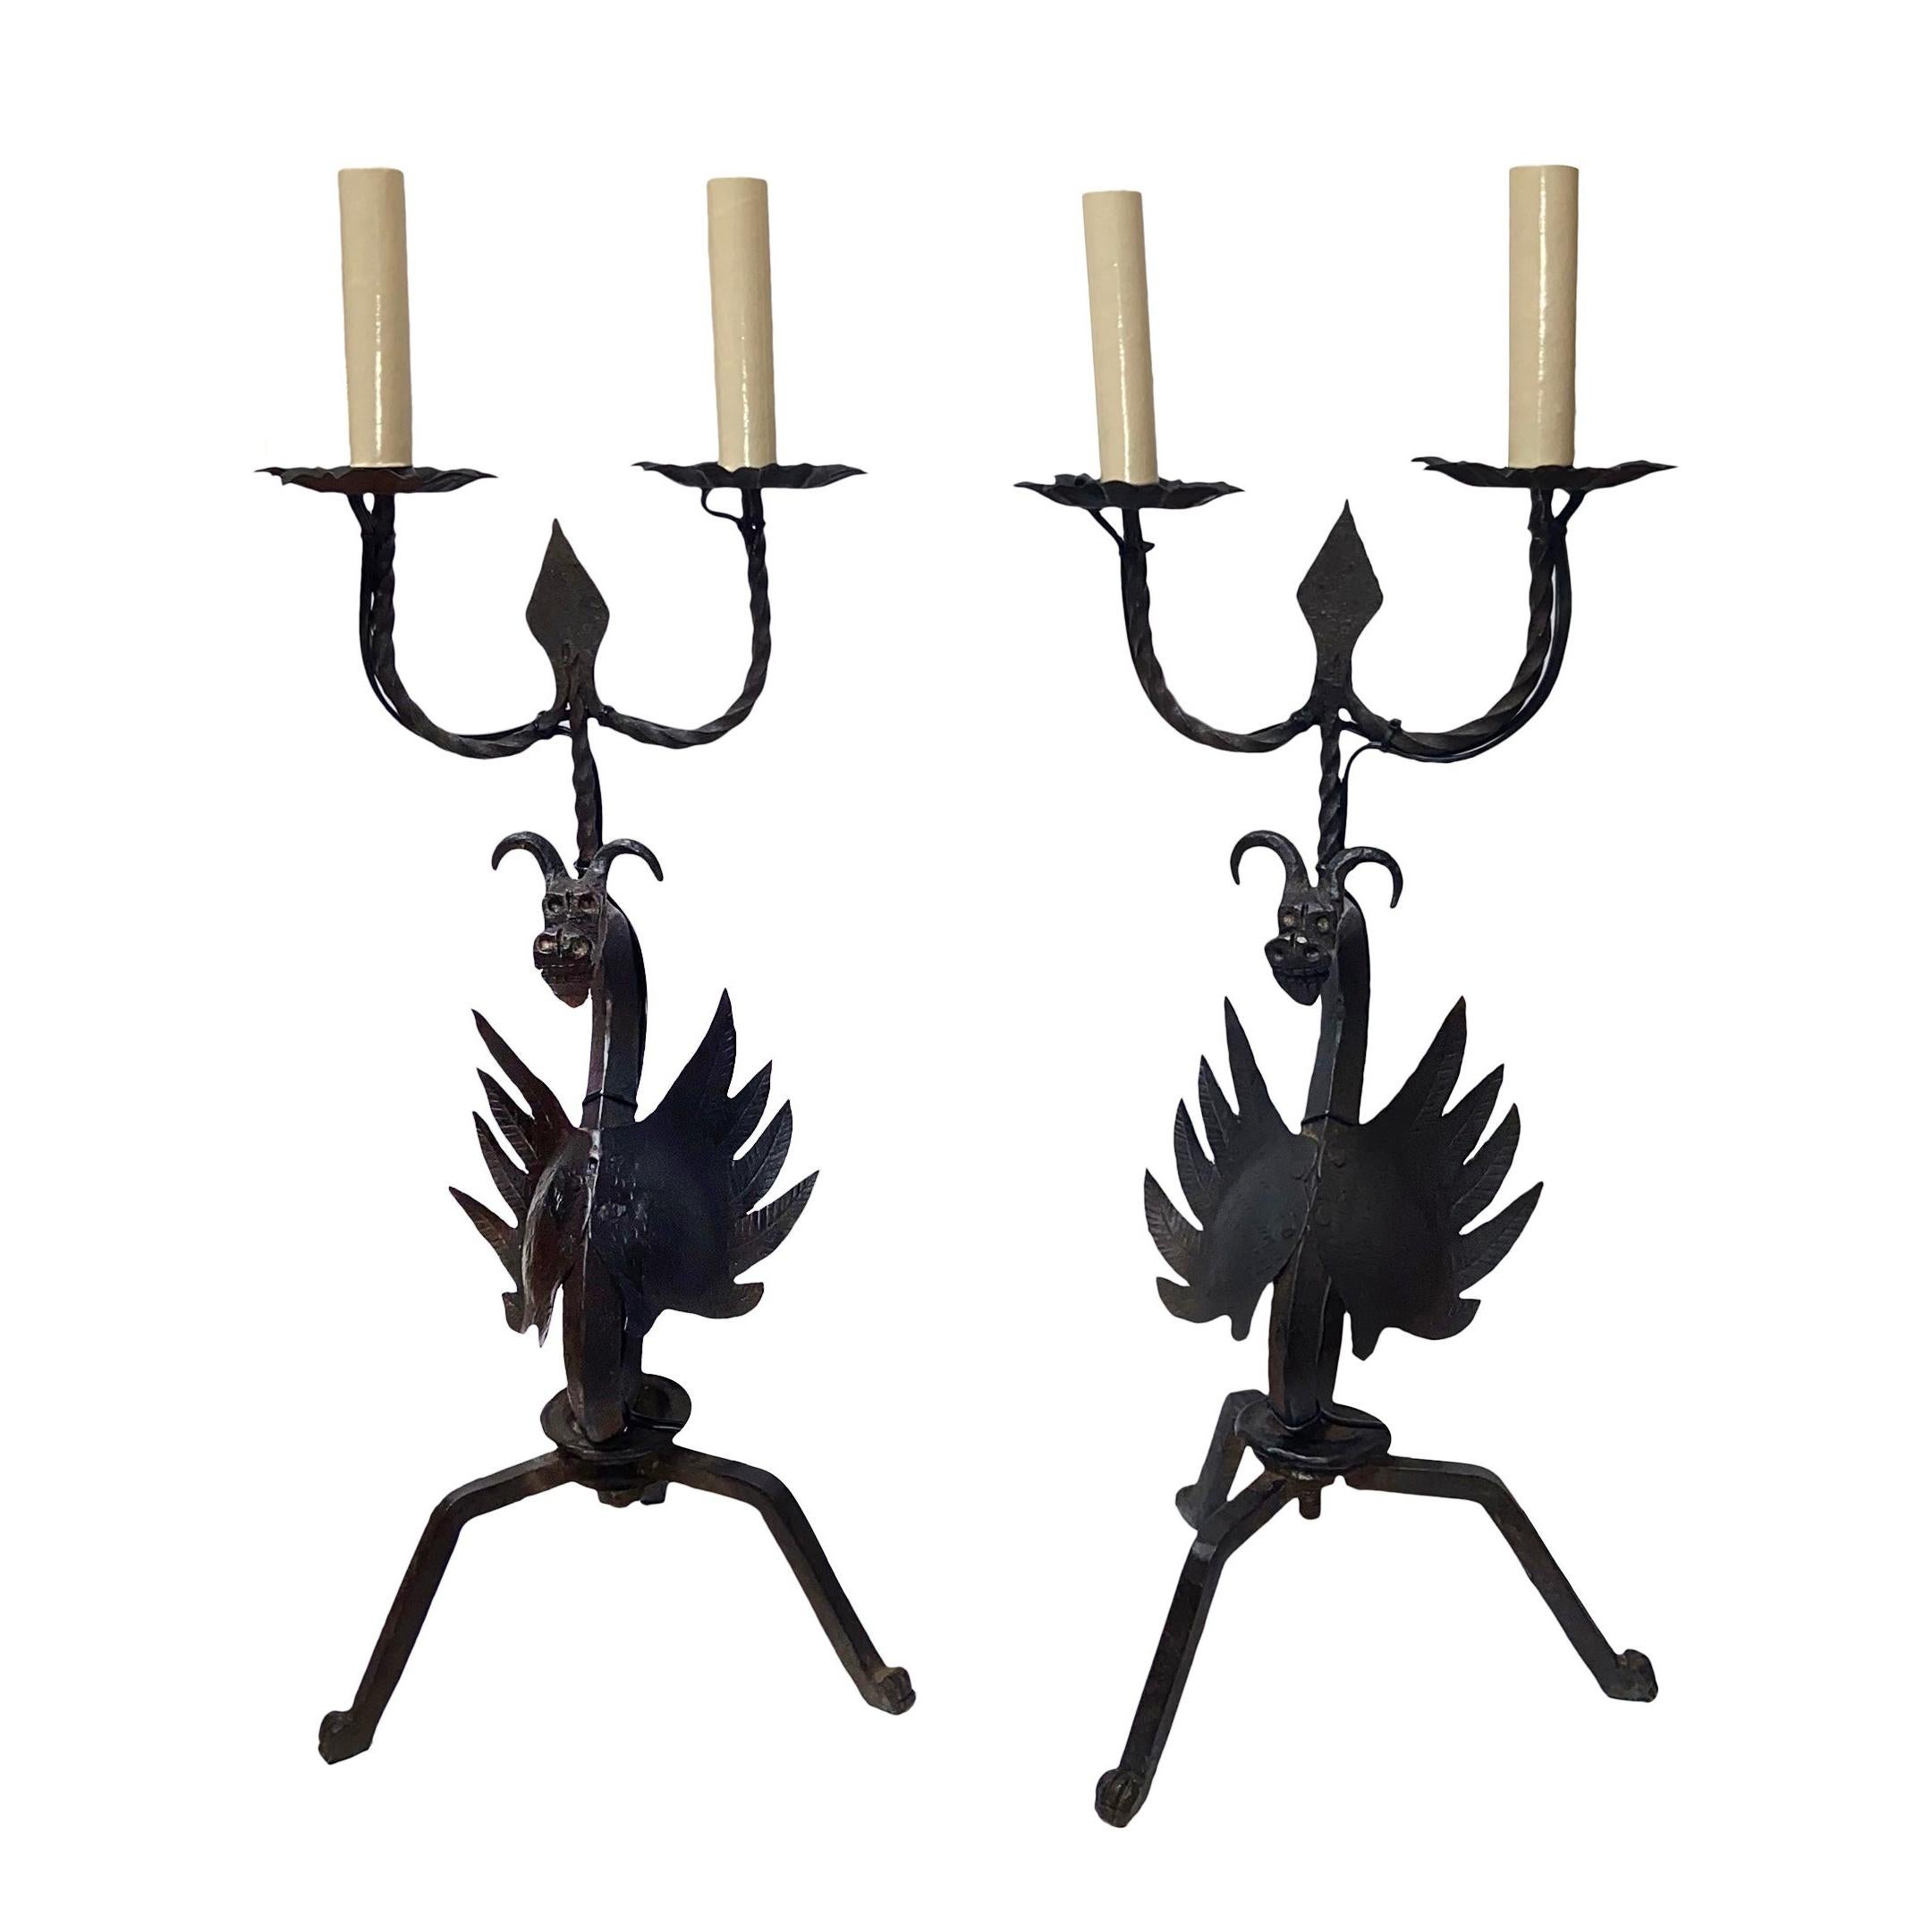 Pair of Antique Iron Table Lamps